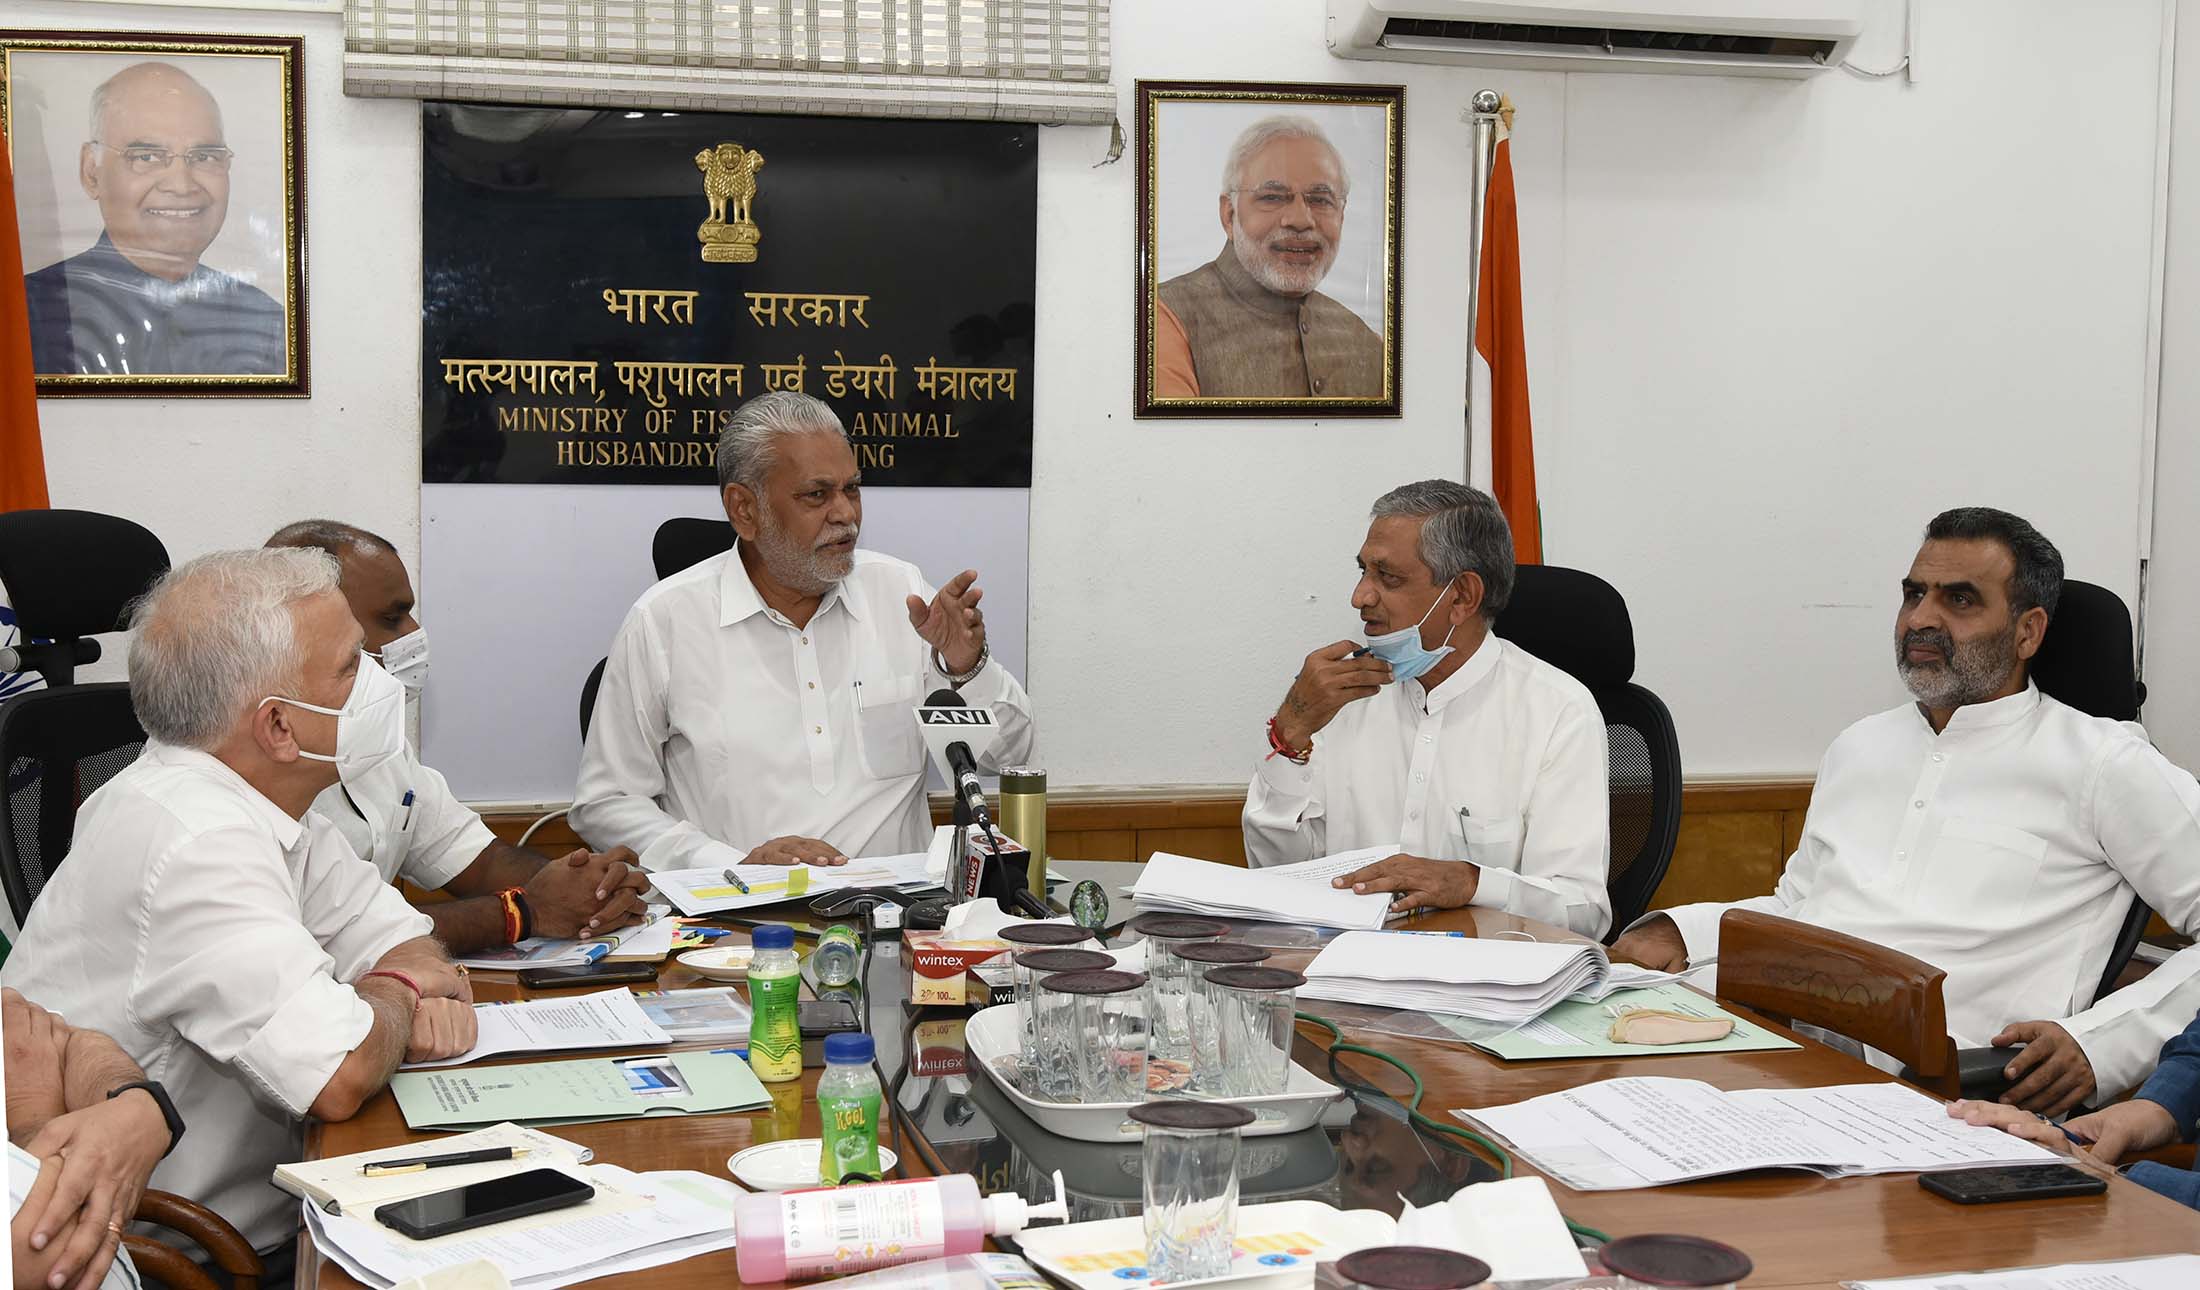 Union Minister of Fisheries, Animal Husbandry and Dairying chairs review  meeting with Gujarat State Animal Husbandry and Dairying Minister